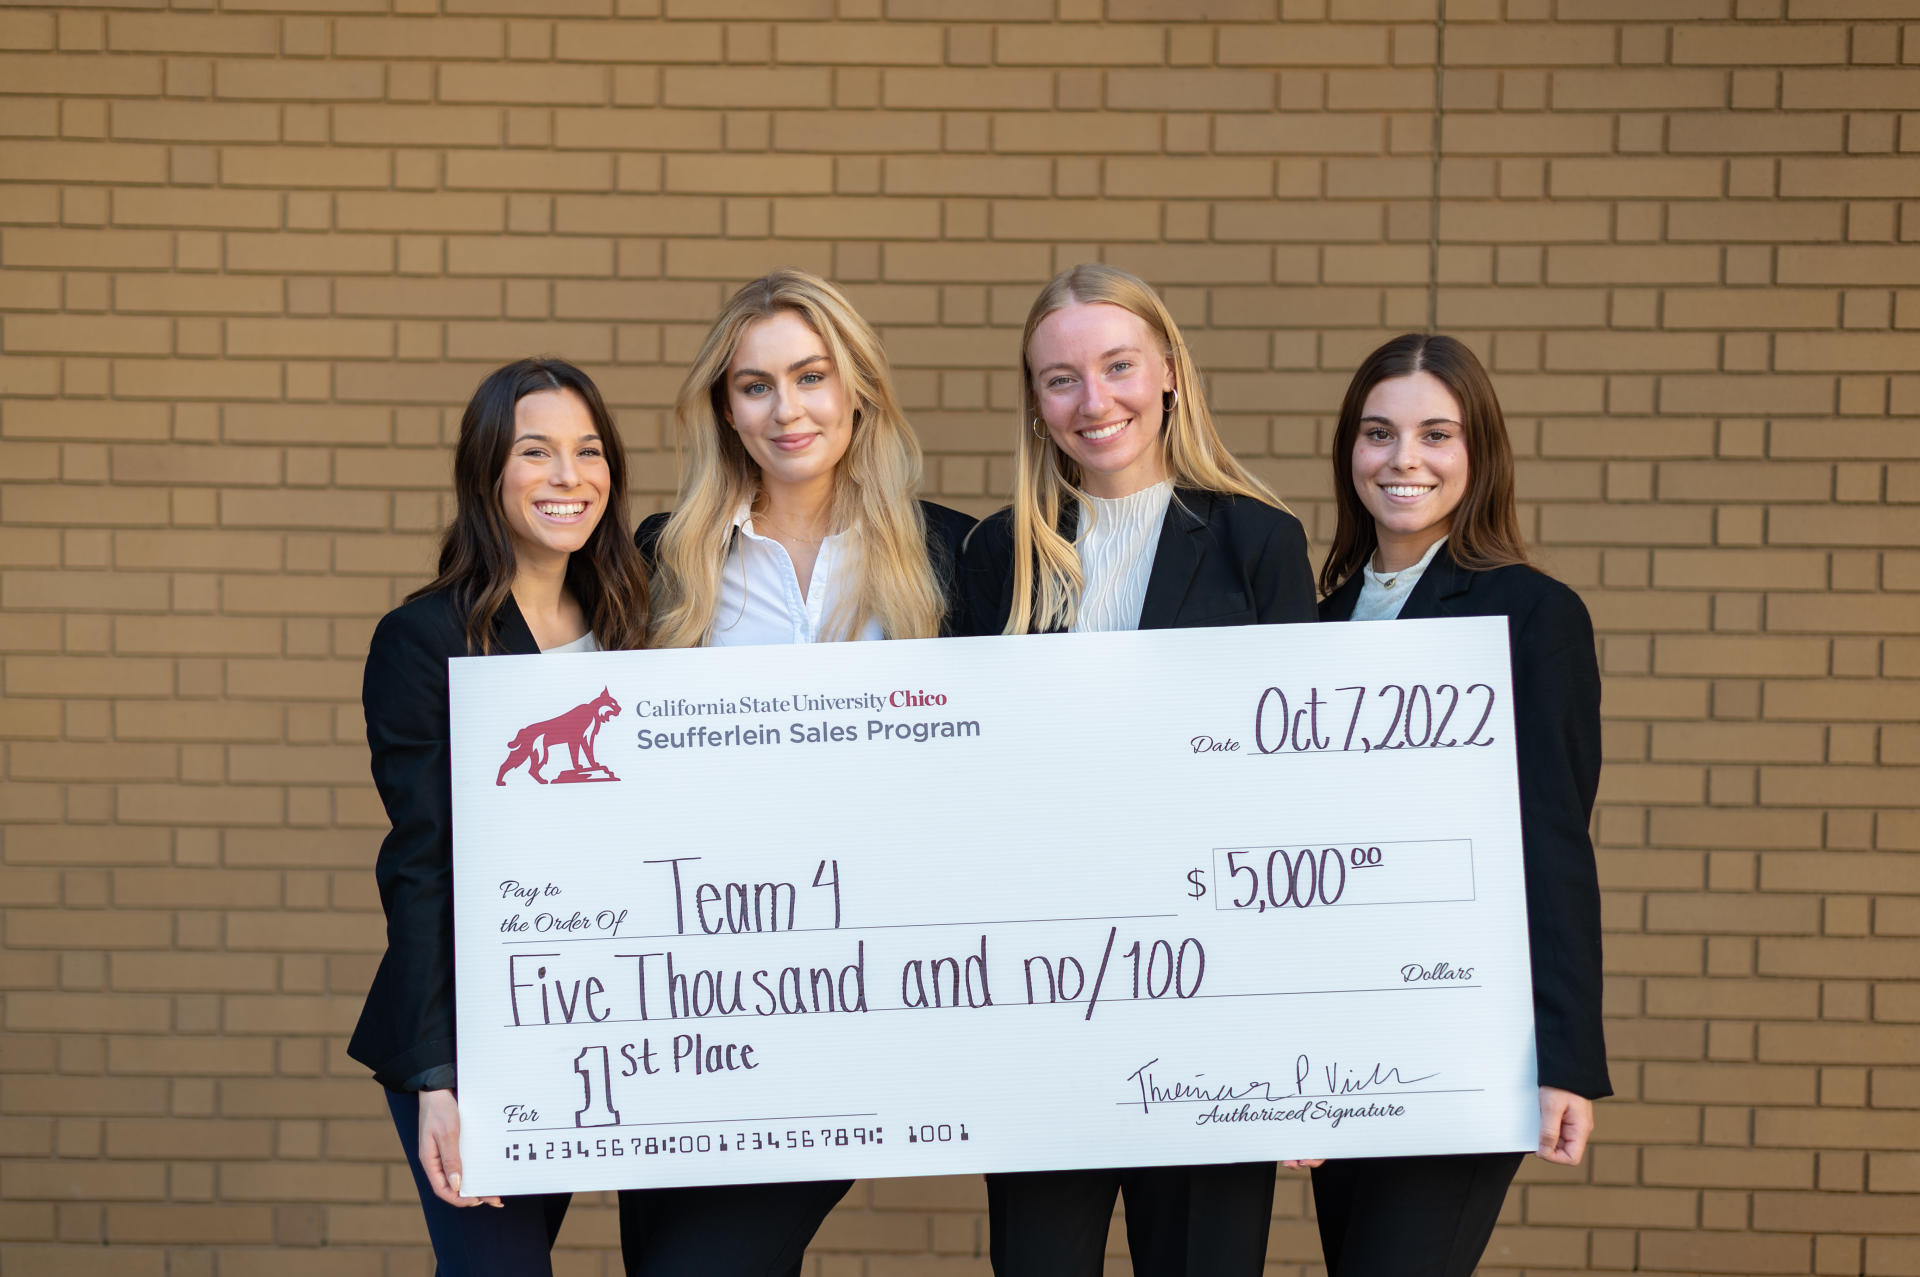 Four students holding an oversized check for $5,000